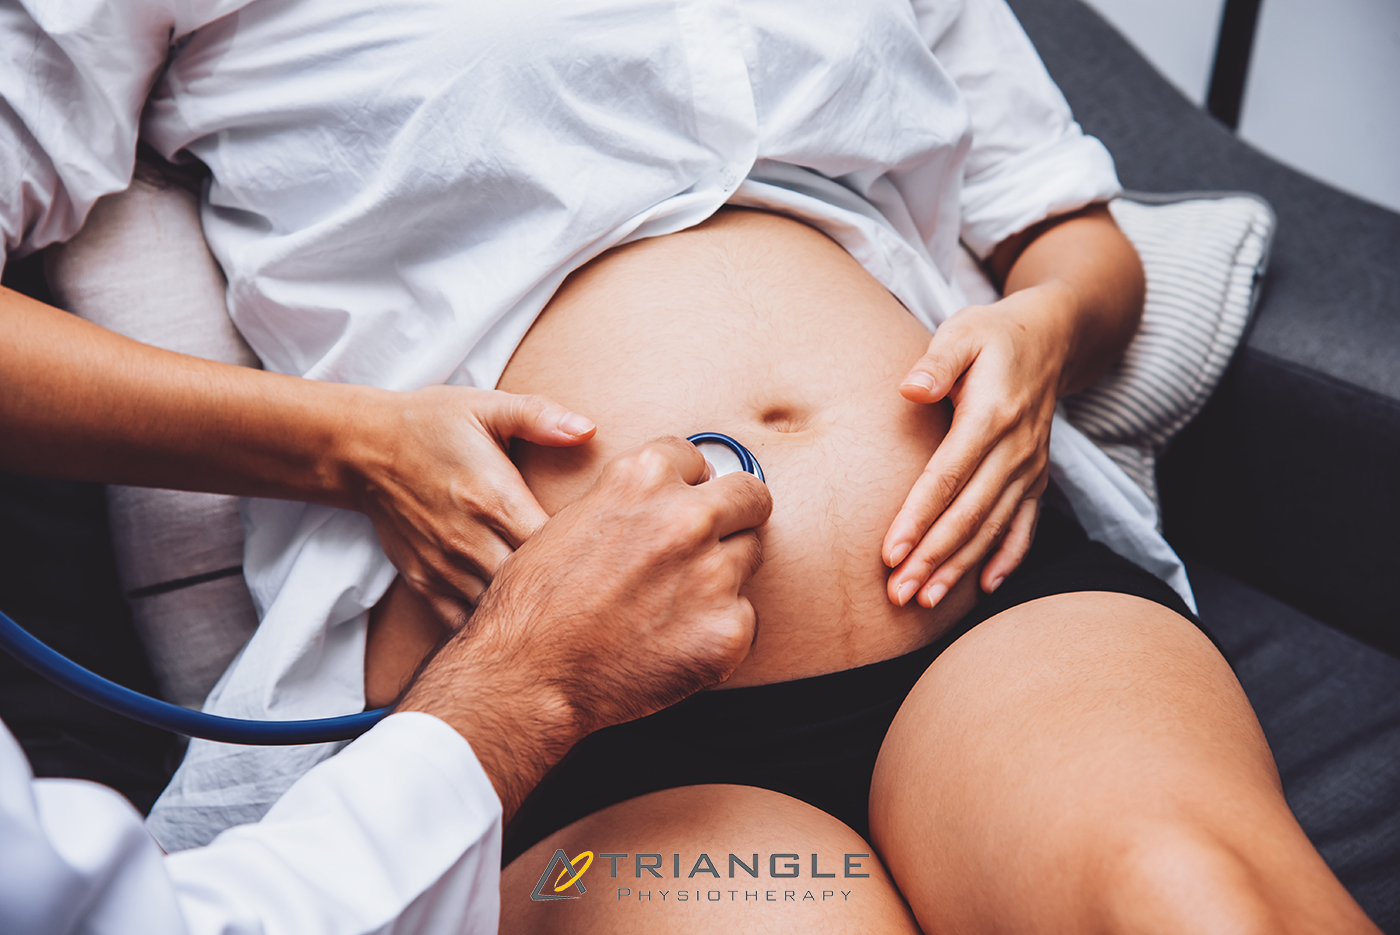 When should I see a Pelvic Floor Physiotherapist after a C-section?